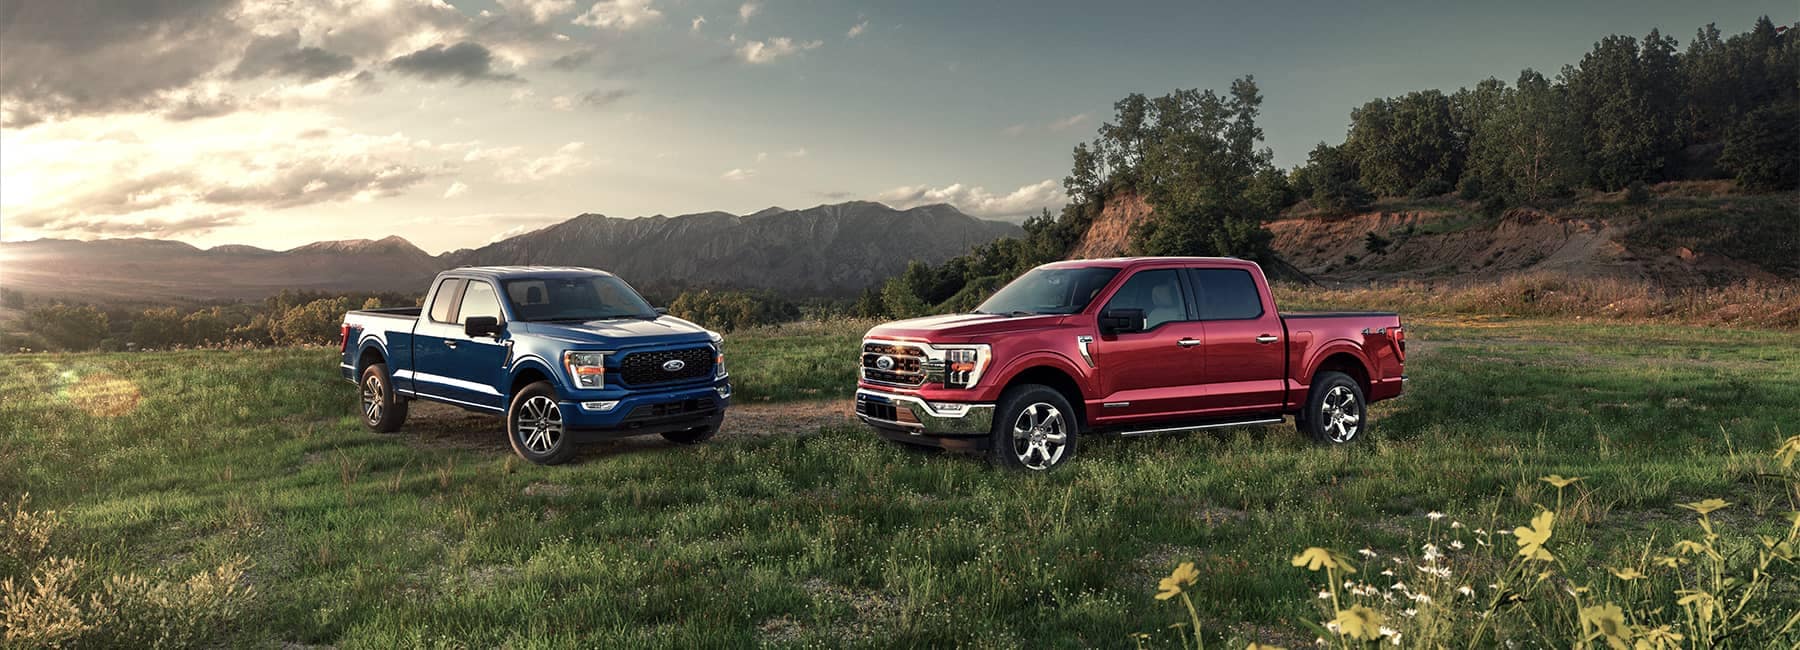 2021 Ford F150 trucks in a mountain valley